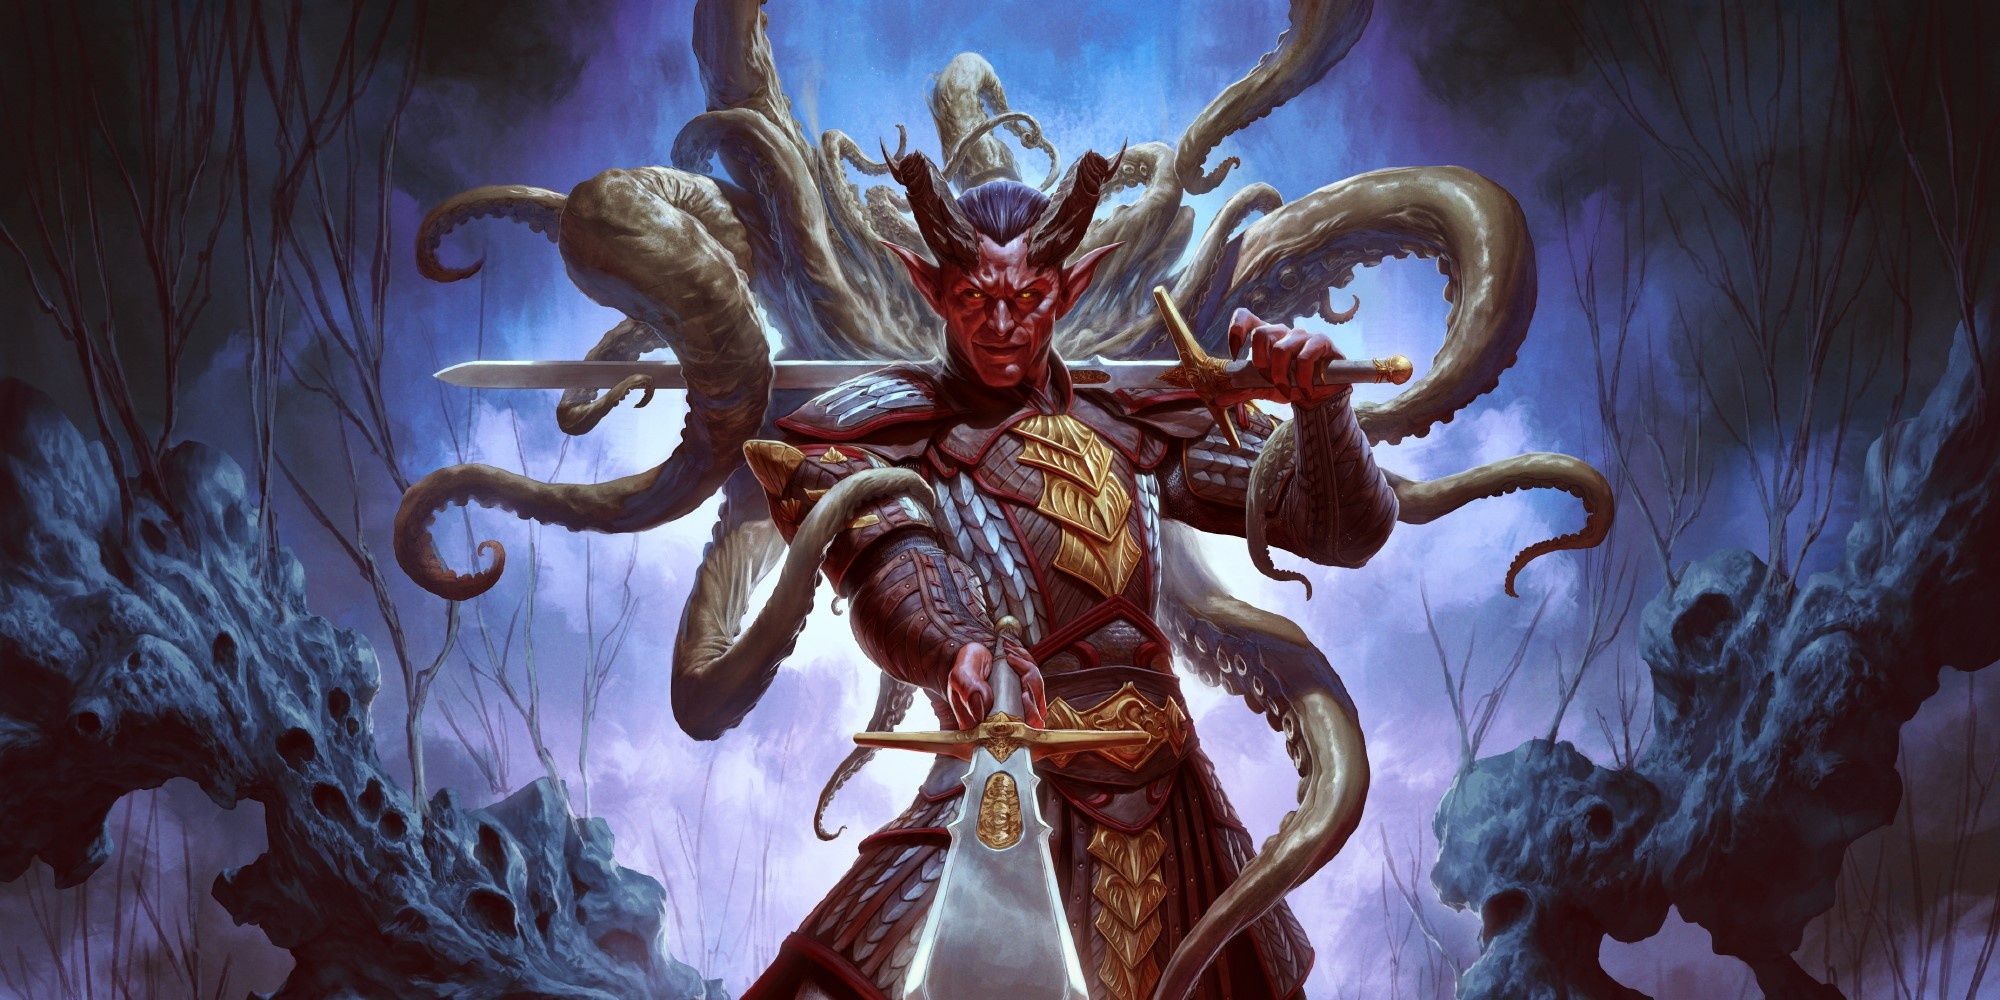 Tiefling warrior with tentacles behind him in cavern